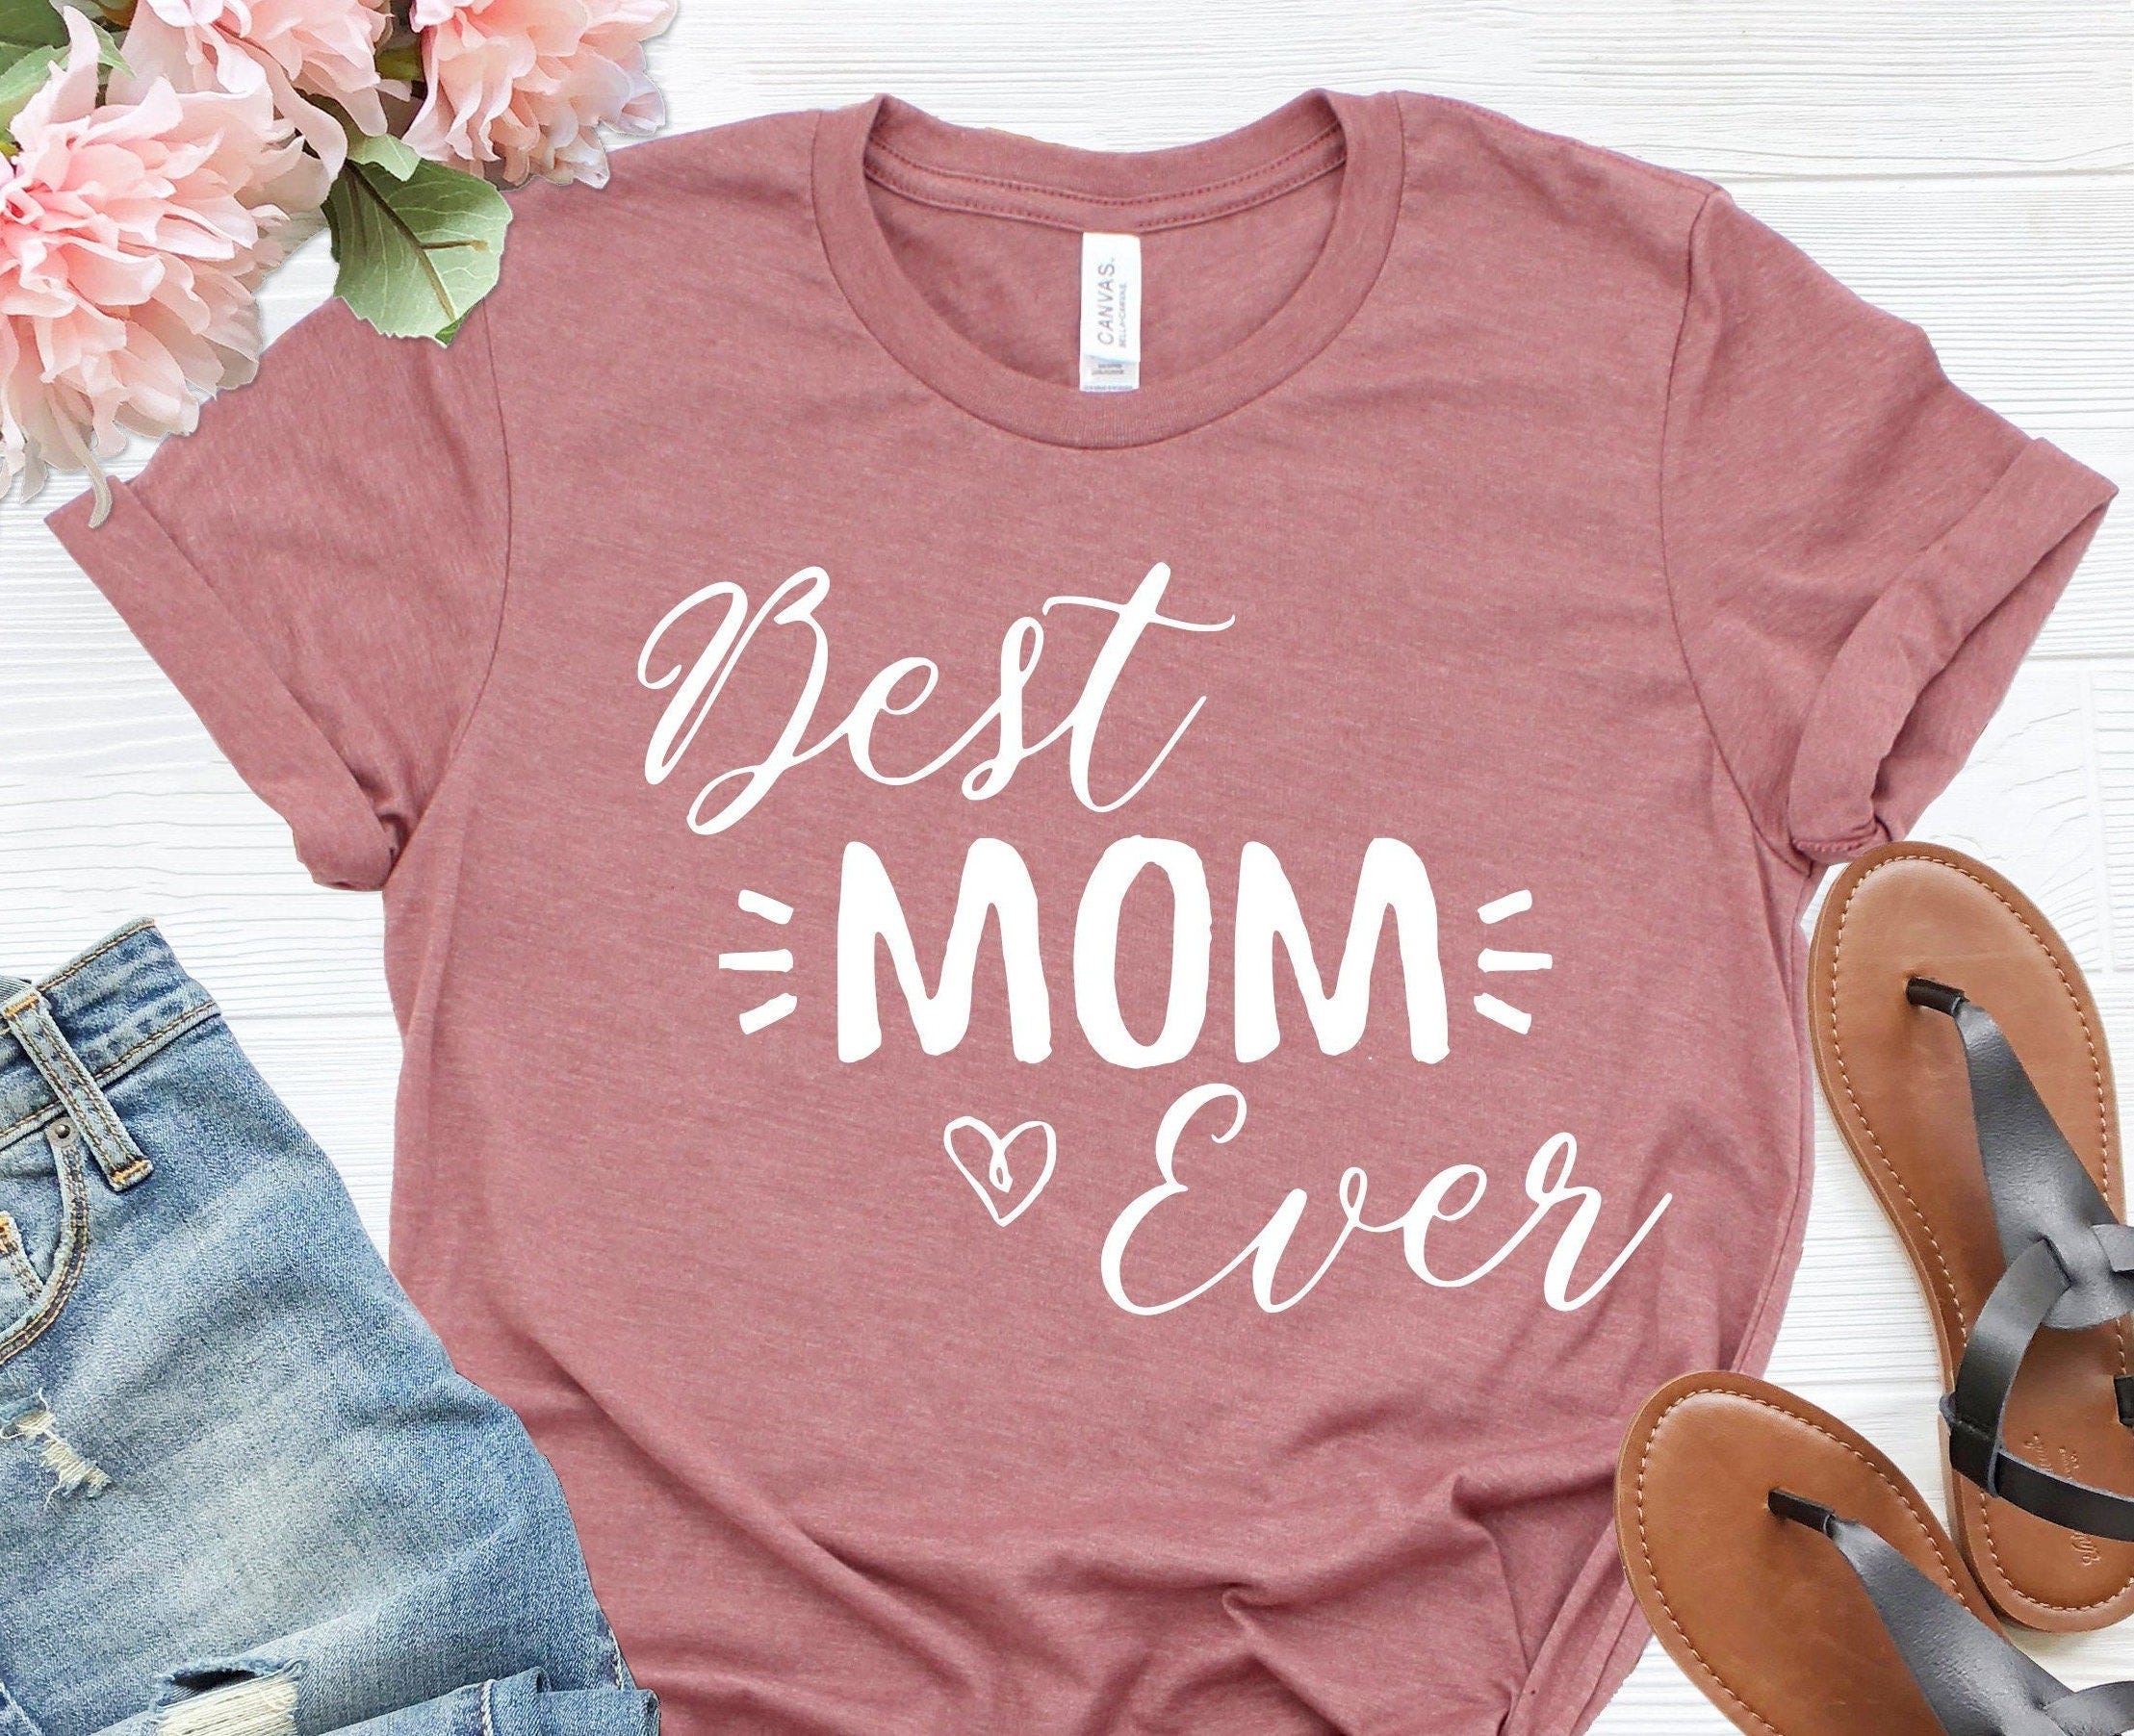 Best Mom Ever Shirt, Mom Shirt, Best Mom Shirt, Gift for Mom, Gift for Her, Mothers Day, Wife Shirt, World